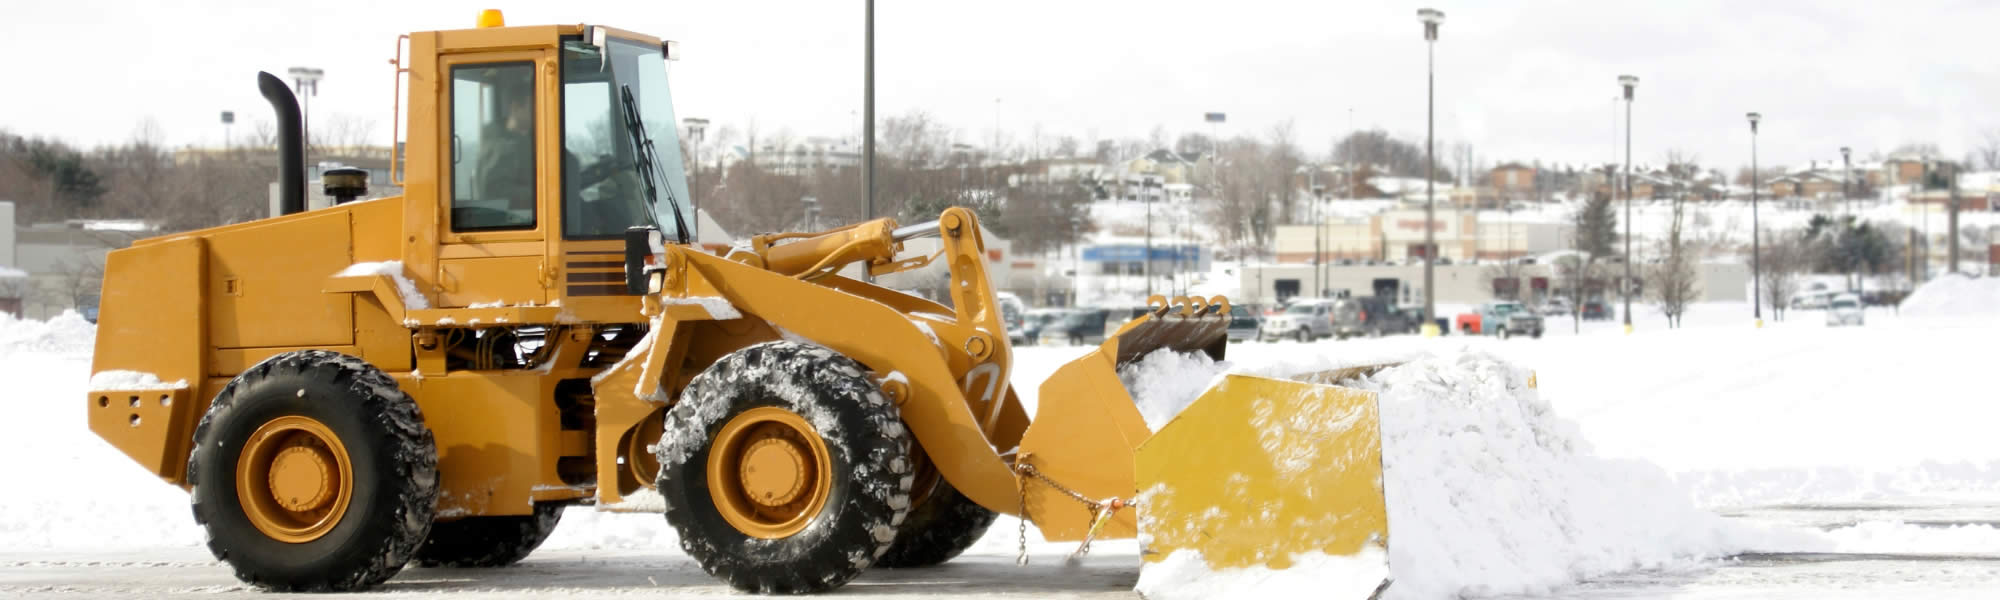 Pulaski Snow and Ice Removal Services near me